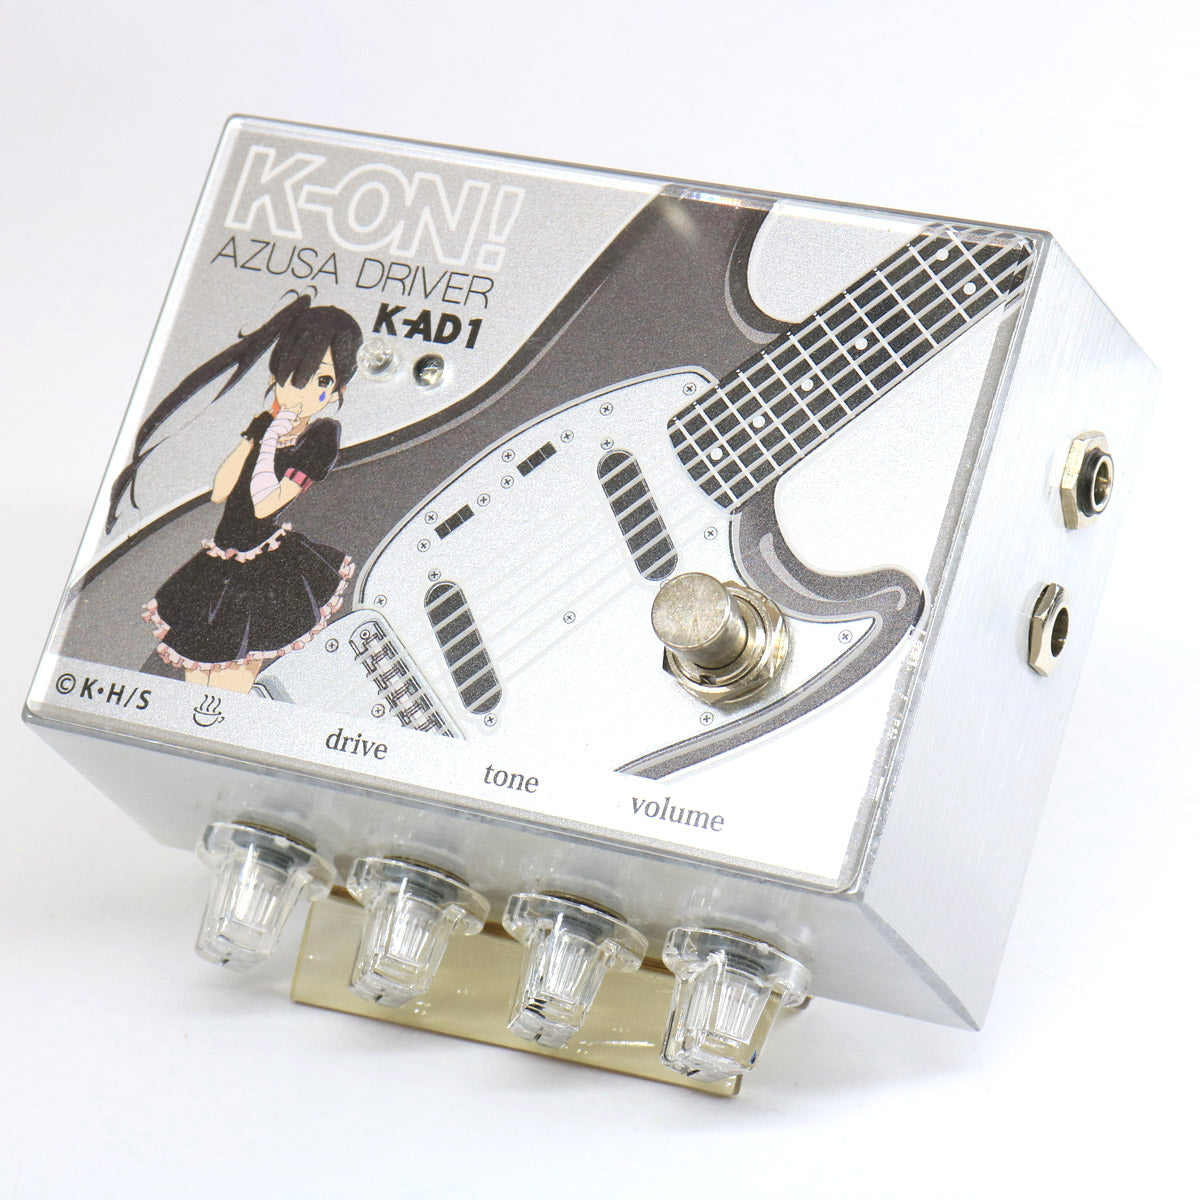 USED K-ON / K-AD1 AZUSA DRIVER Overdrive for guitar [08]